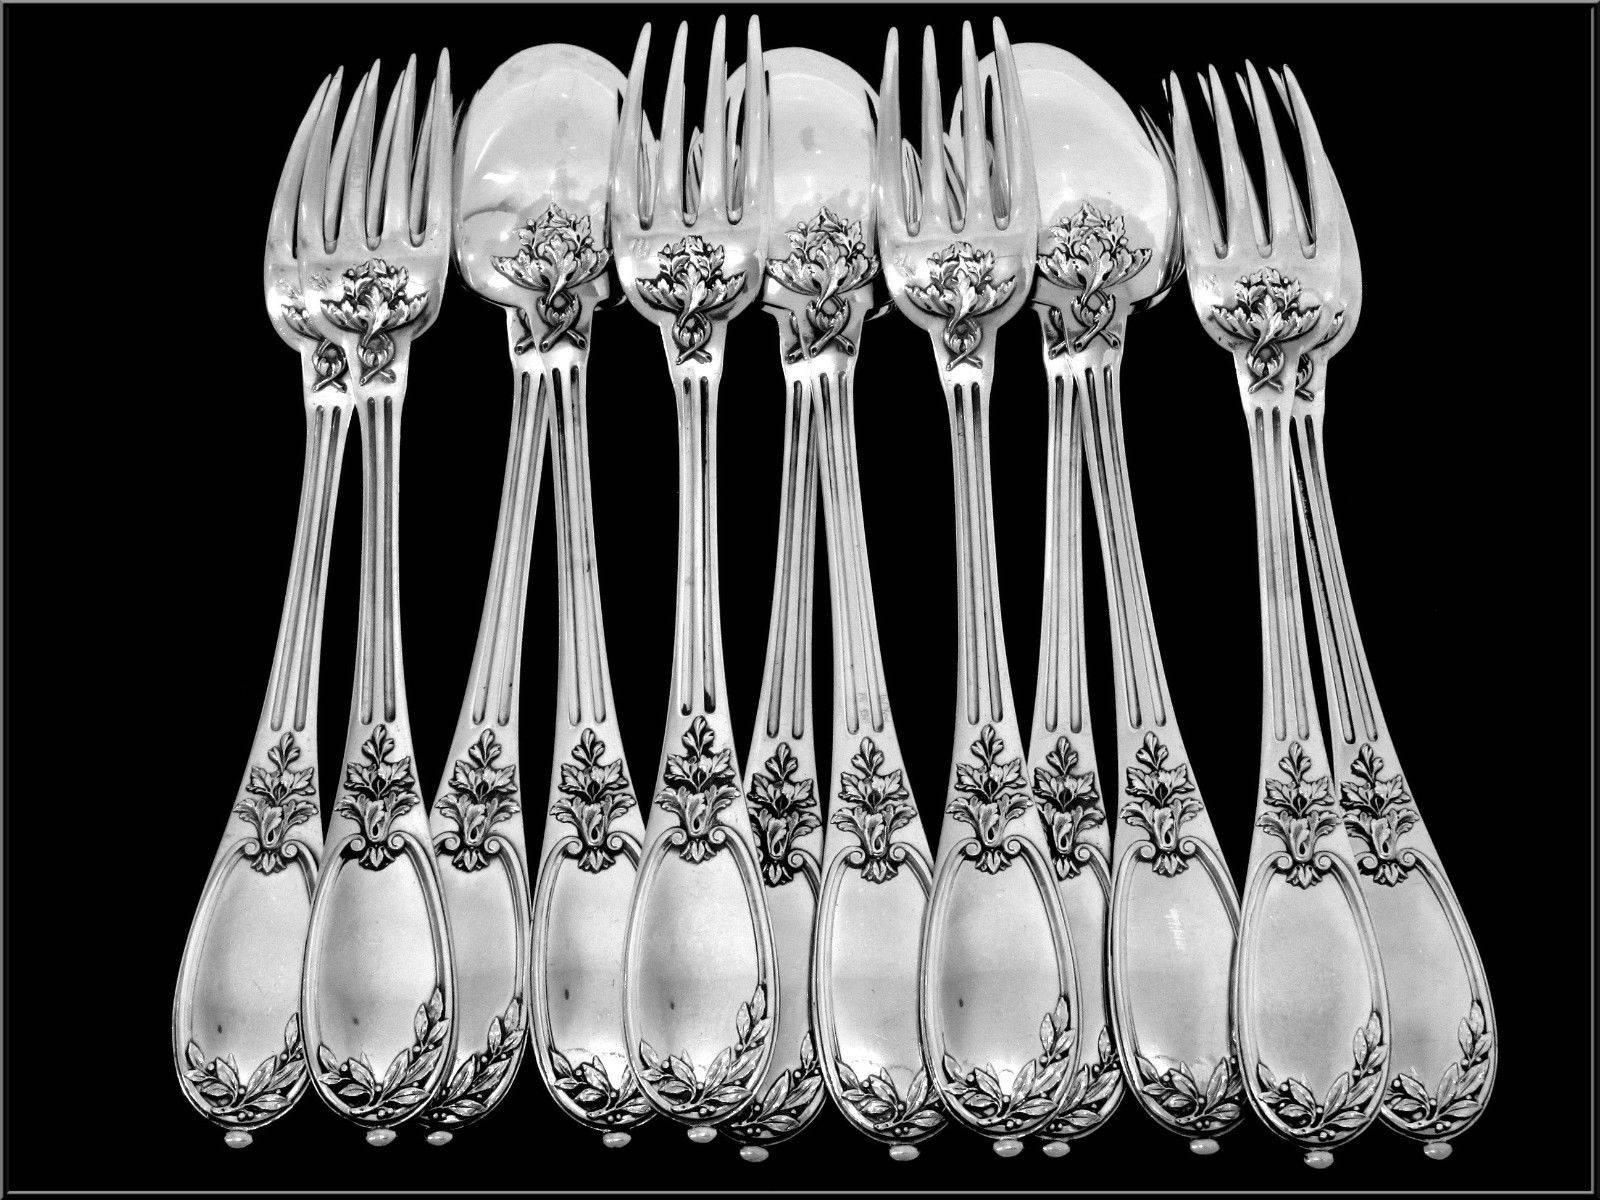 Henin French Sterling Silver Dinner Flatware Set of 12 Pieces, Neoclassical 6